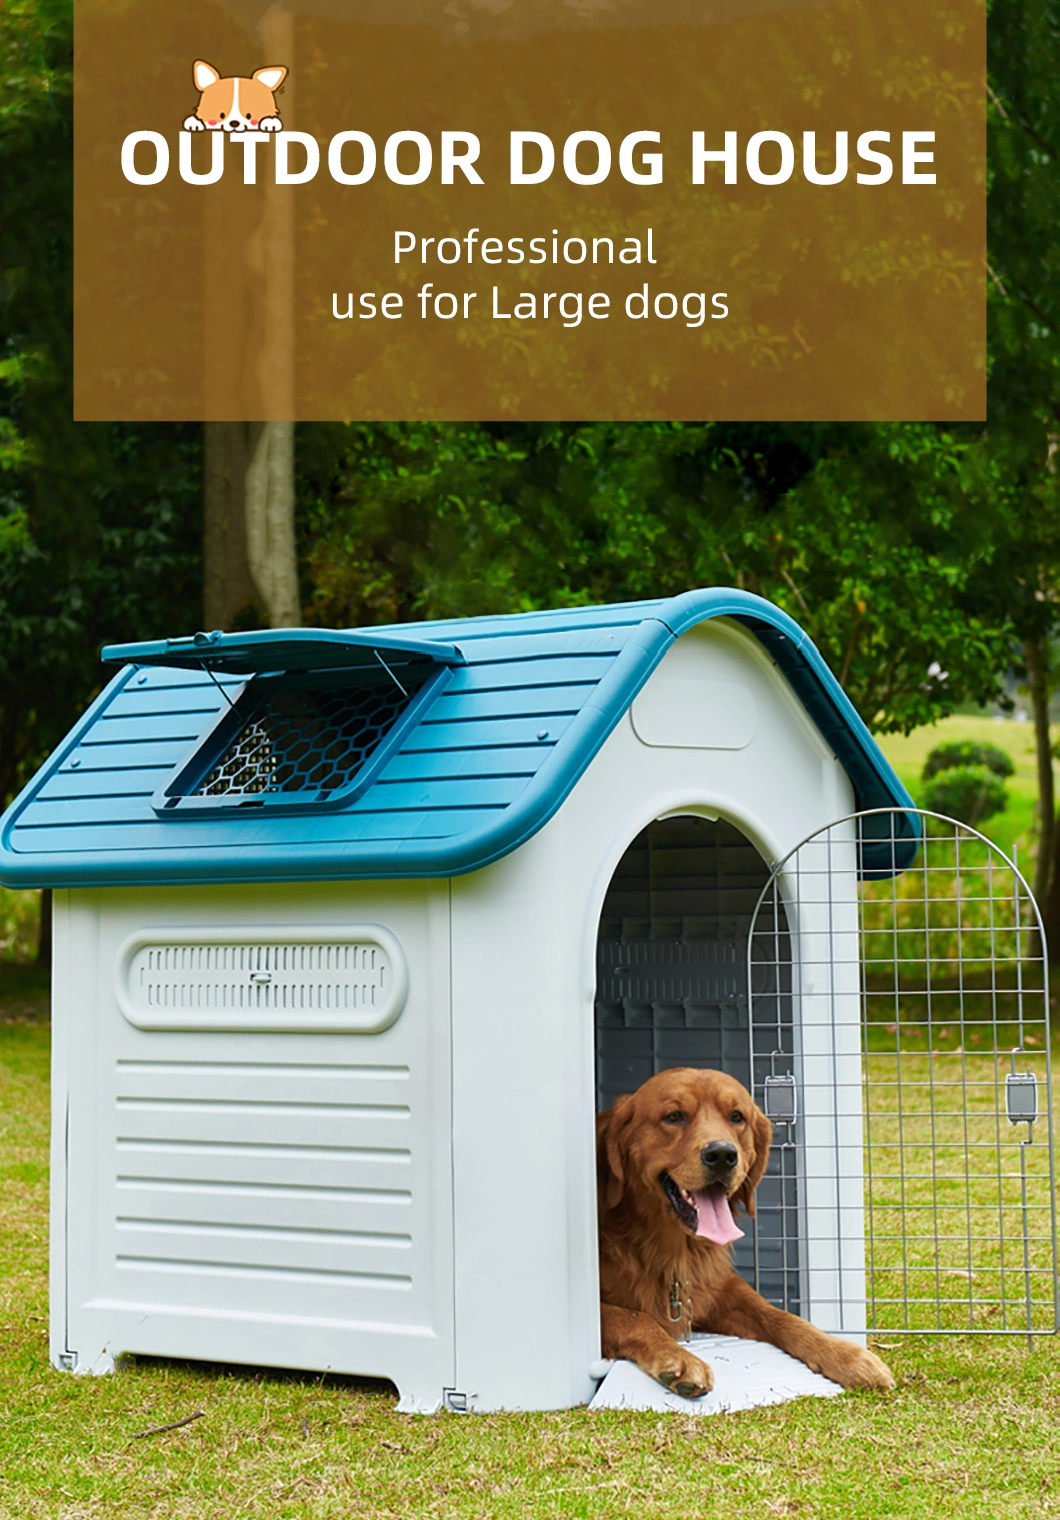 Manufacture Customized Modern Small/Little Large Luxury Waterproof Portable Kennel Environmental Comfortable Indoor/Outdoor Plastic Dog Pet House for Sale